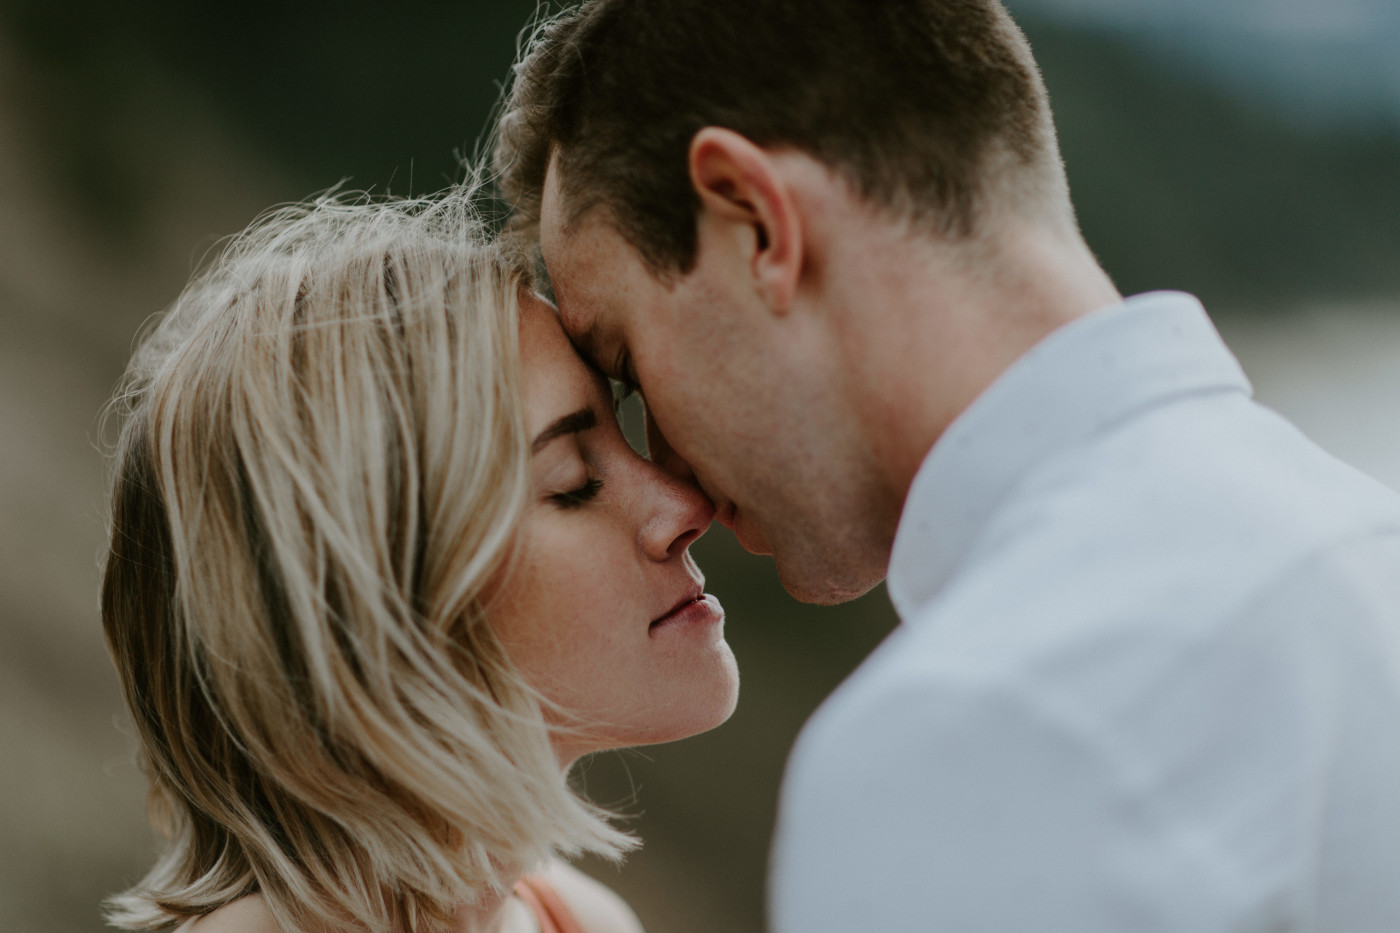 Billy and Chelsey go in for a kiss. Elopement wedding photography at Cannon Beach by Sienna Plus Josh.